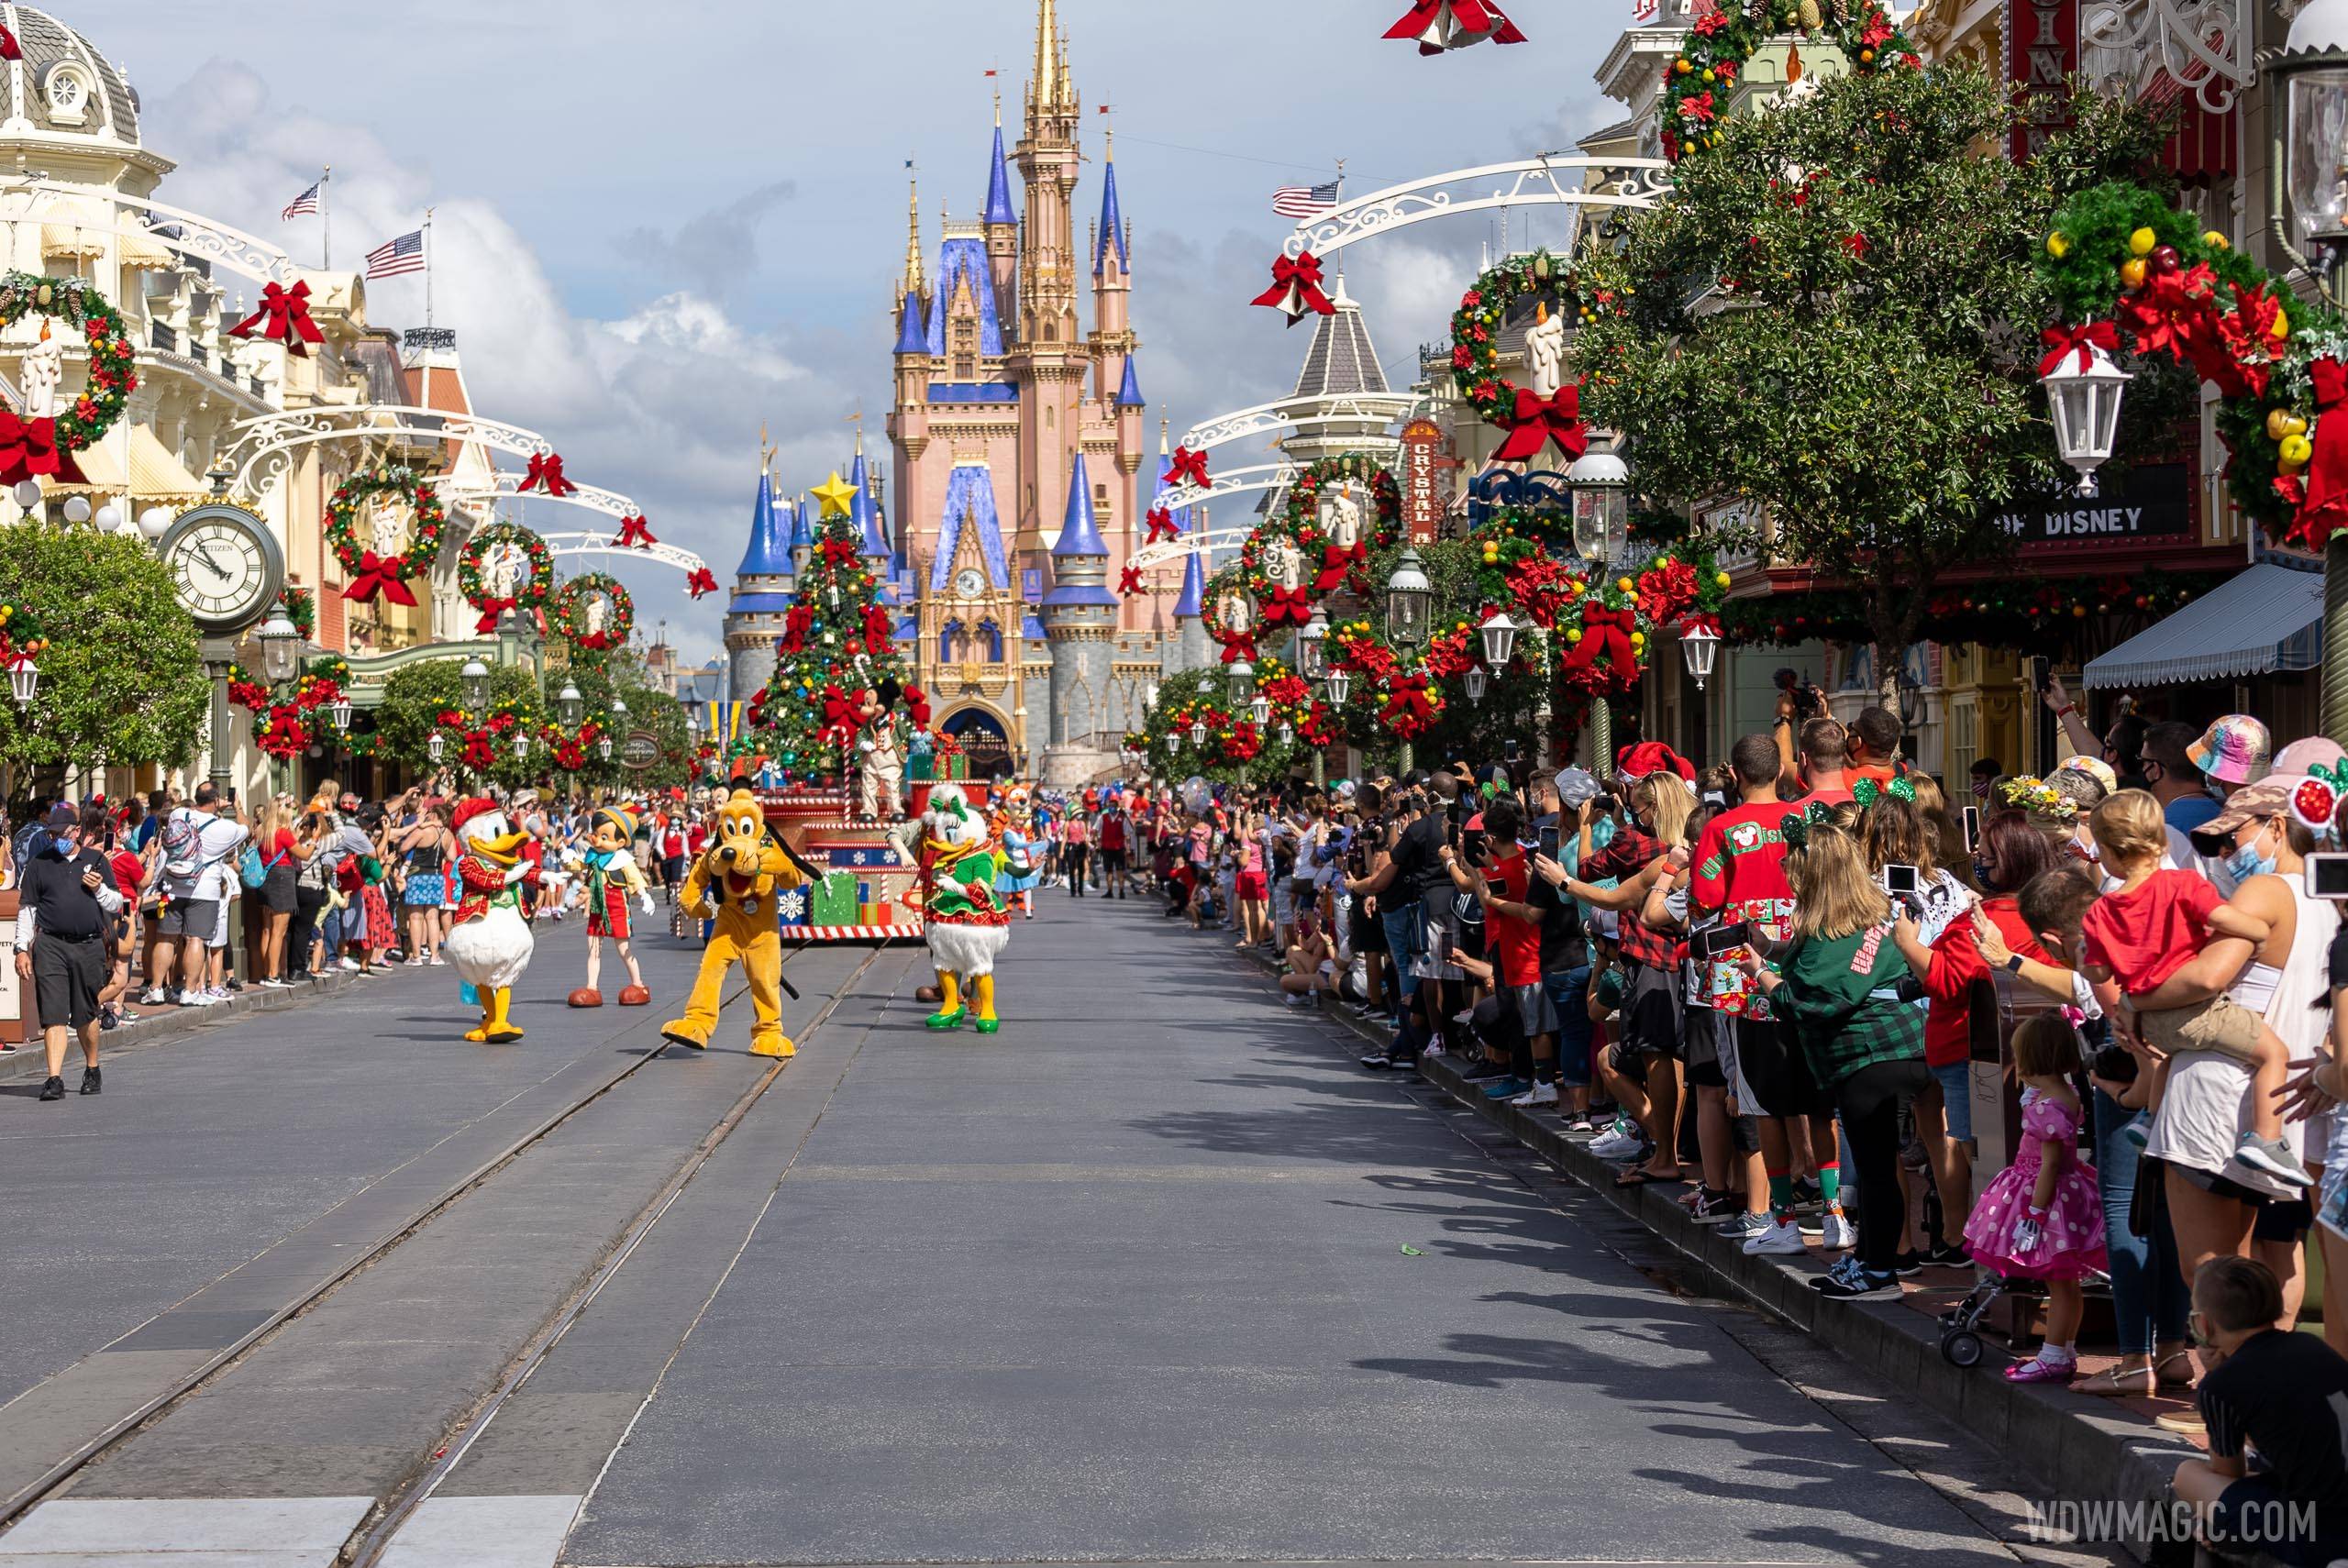 Disney expects the park to be busier beyond the New Year